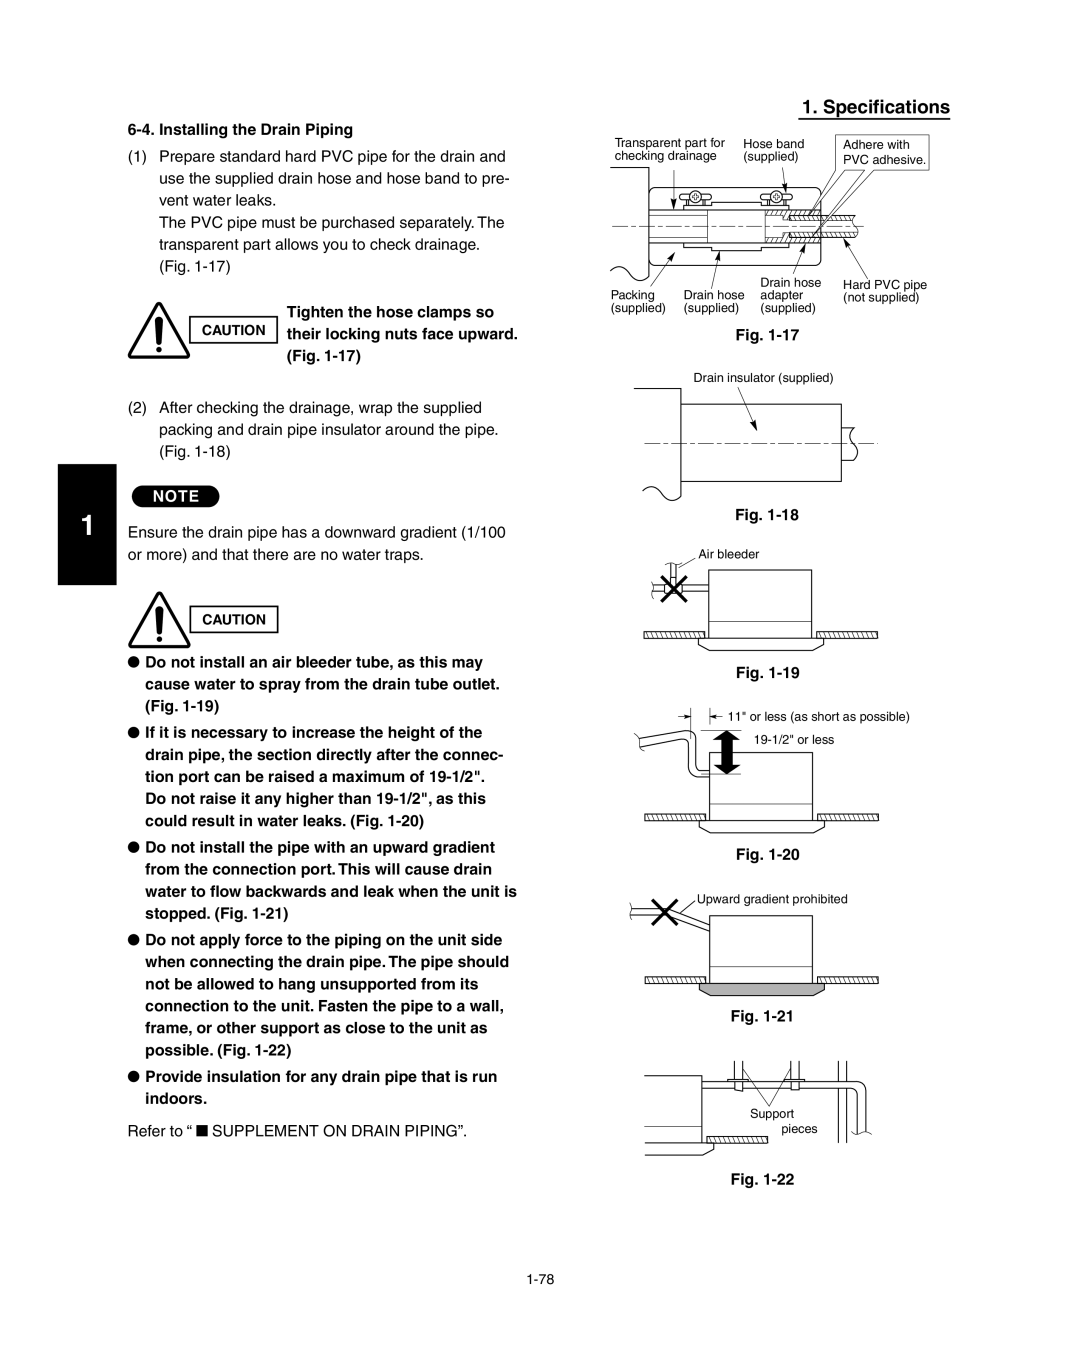 Panasonic R410A service manual Specifications, Installing the Drain Piping, Fig 